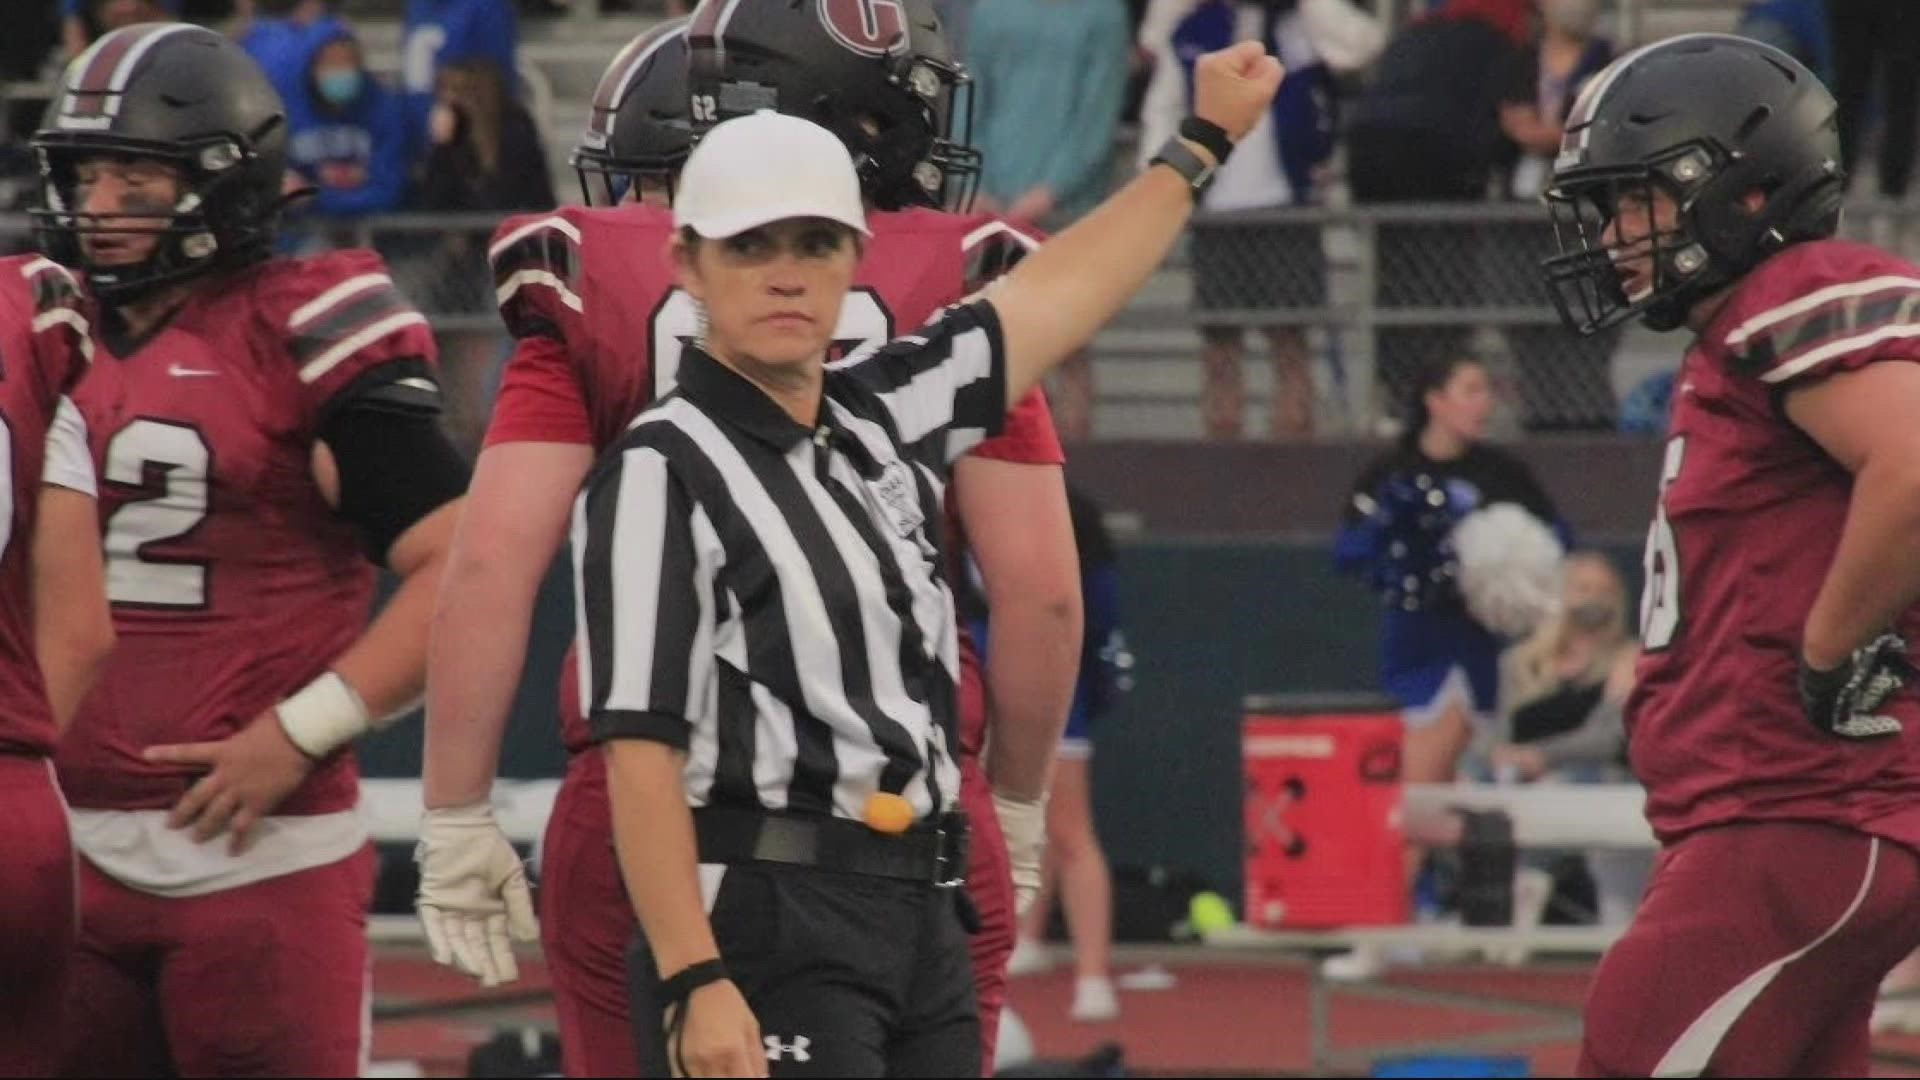 The six referees at Friday's Hillsboro-Glencoe game were the first all-female crew to officiate a high school boys' varsity football game in Oregon.